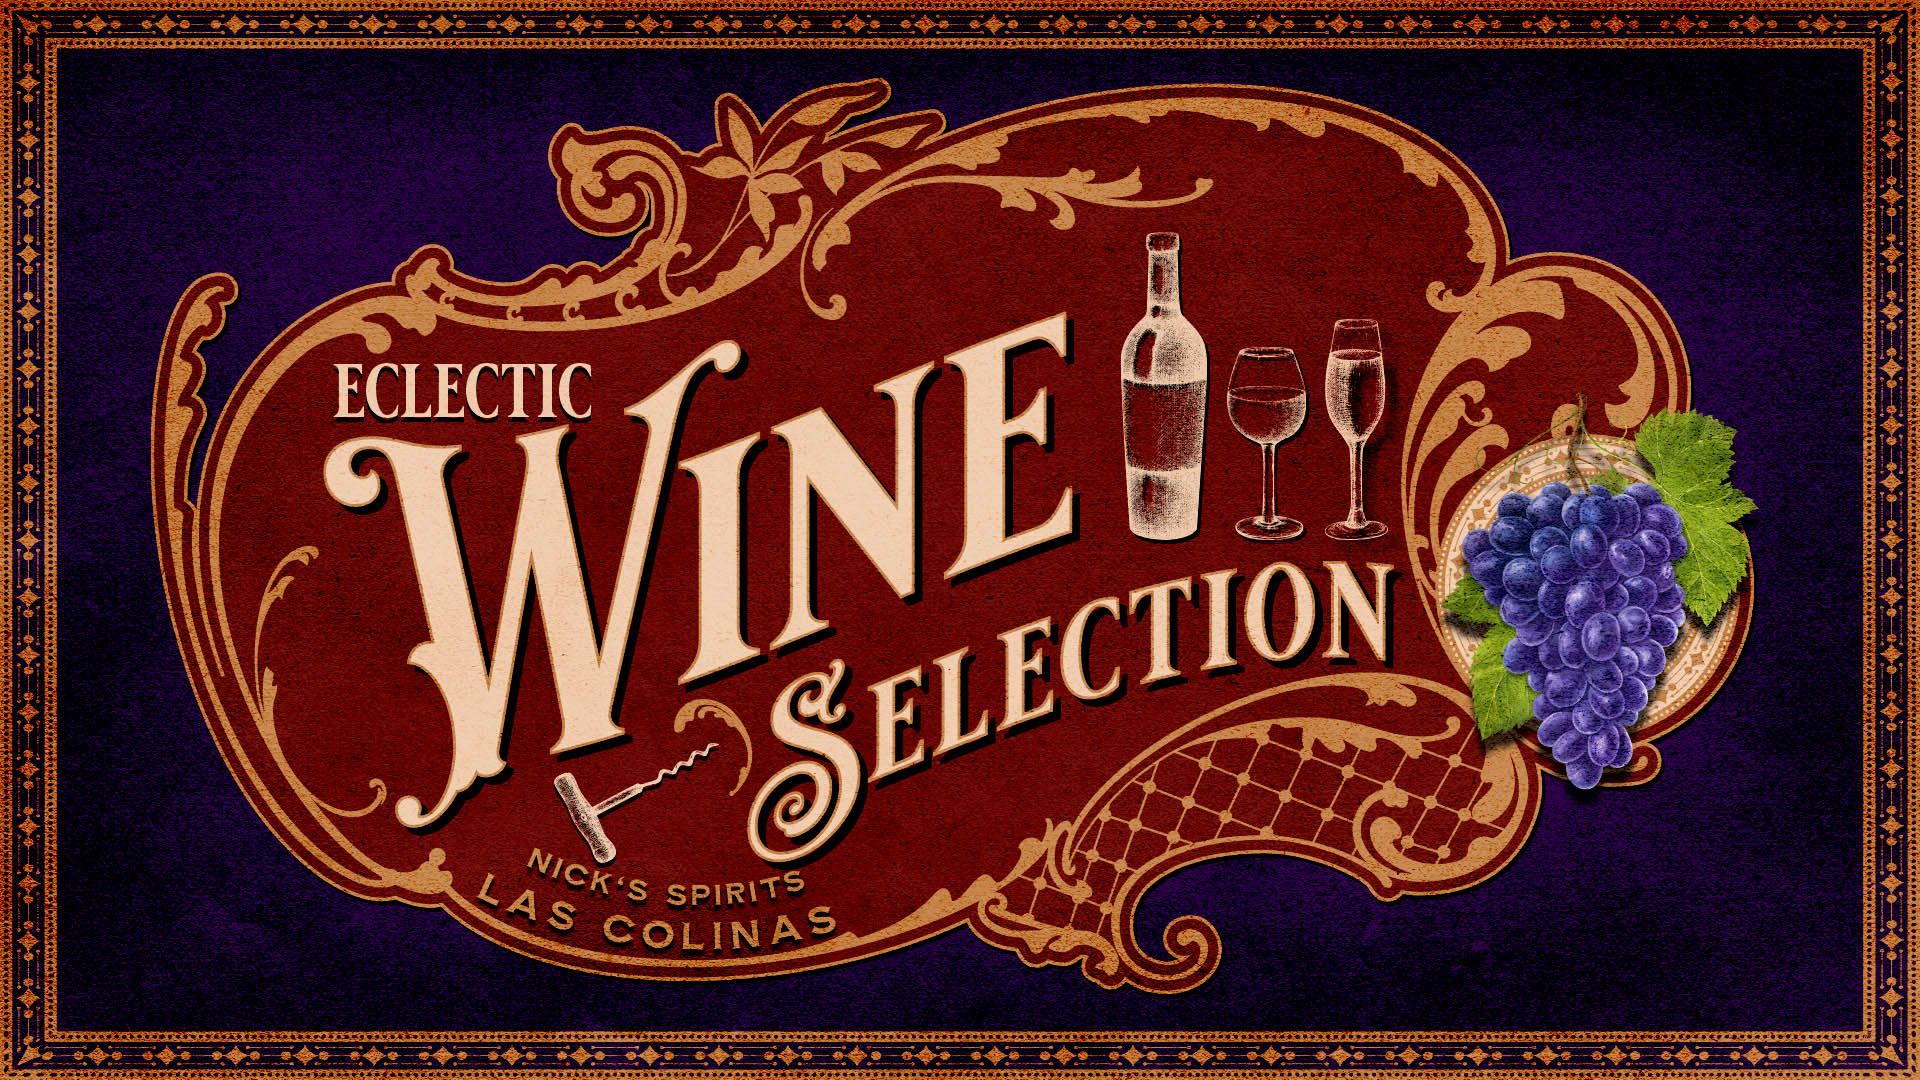 Eclectic Wine Selection by Nick's Spirits